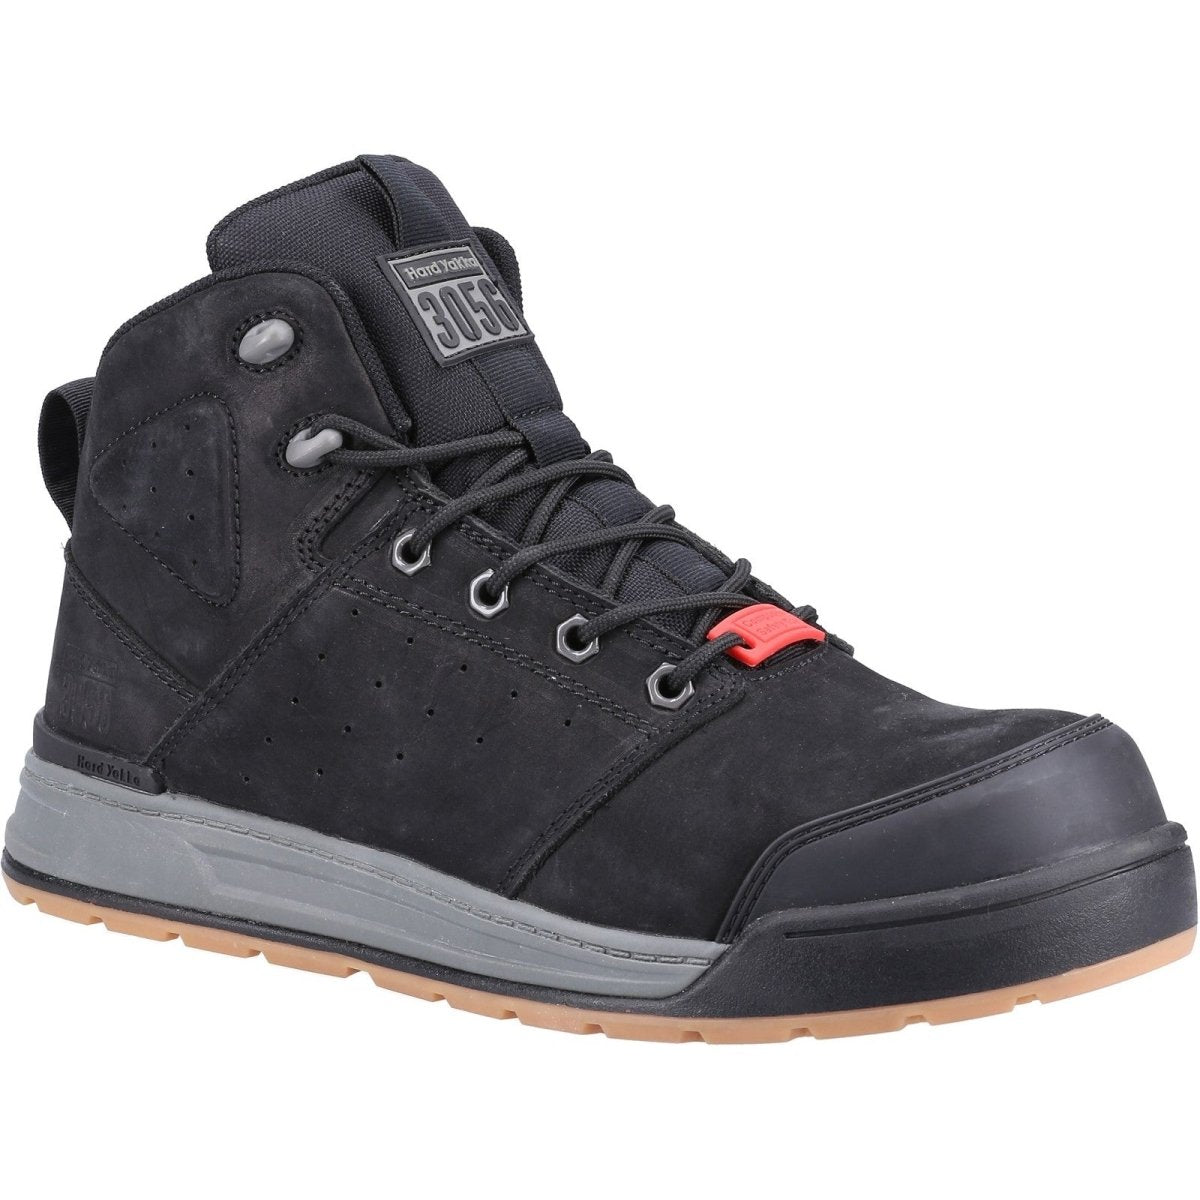 Hard Yakka 3056 Mens Lace & Zip Composite Safety Boots - Shoe Store Direct